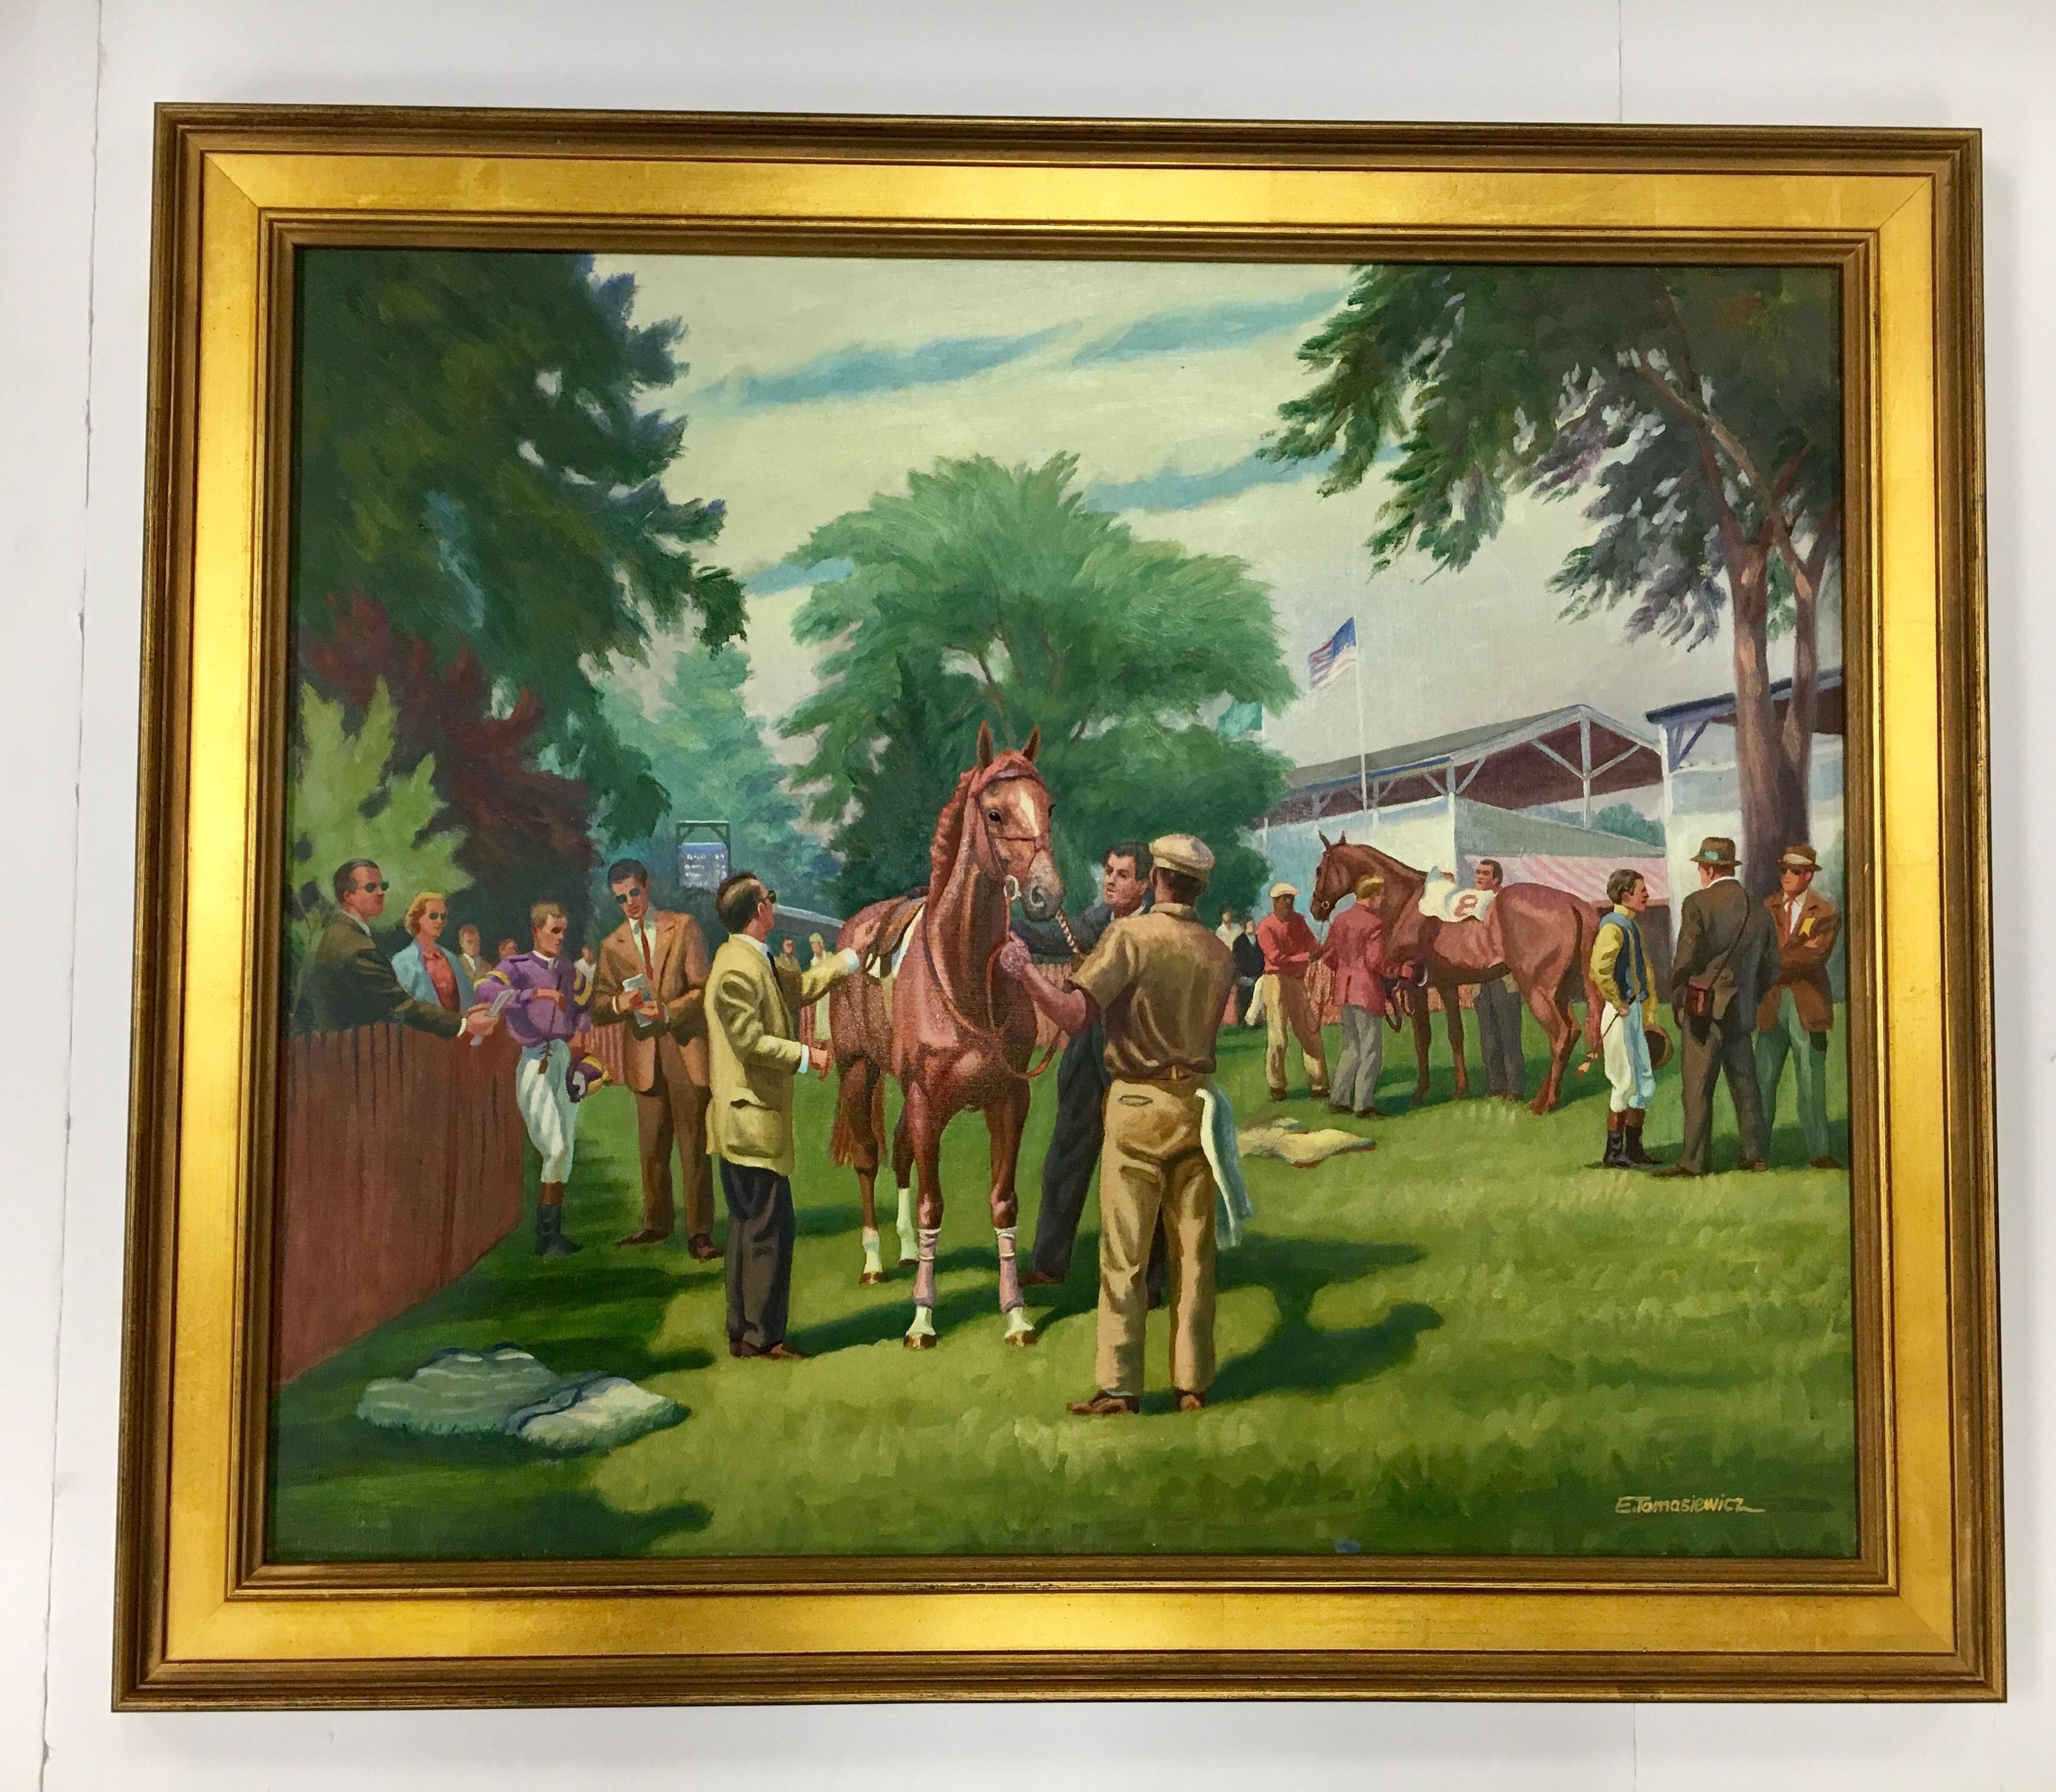 Stunning original Edward Tomasiewicz (1919 - 2006) oil painting depicting a equestrian scene in the countryside. His work is featured in and around the northeast part of the United States. Medium is oil on canvas and frame is original.